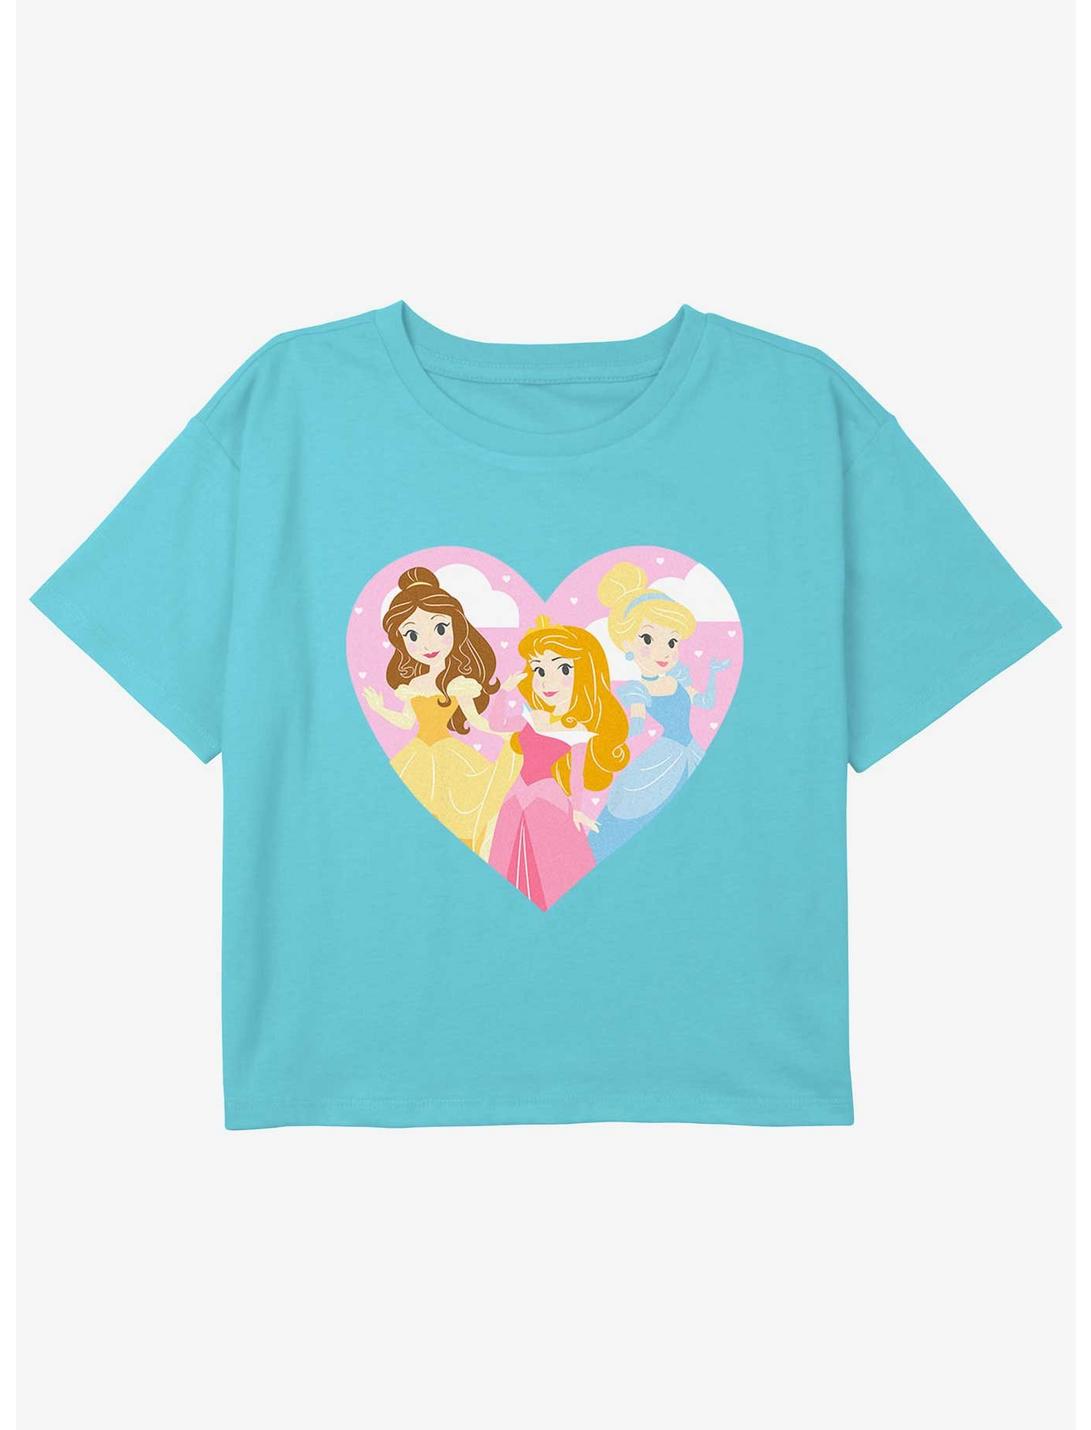 Disney Beauty and the Beast Castle Princess Girls Youth Crop T-Shirt, BLUE, hi-res